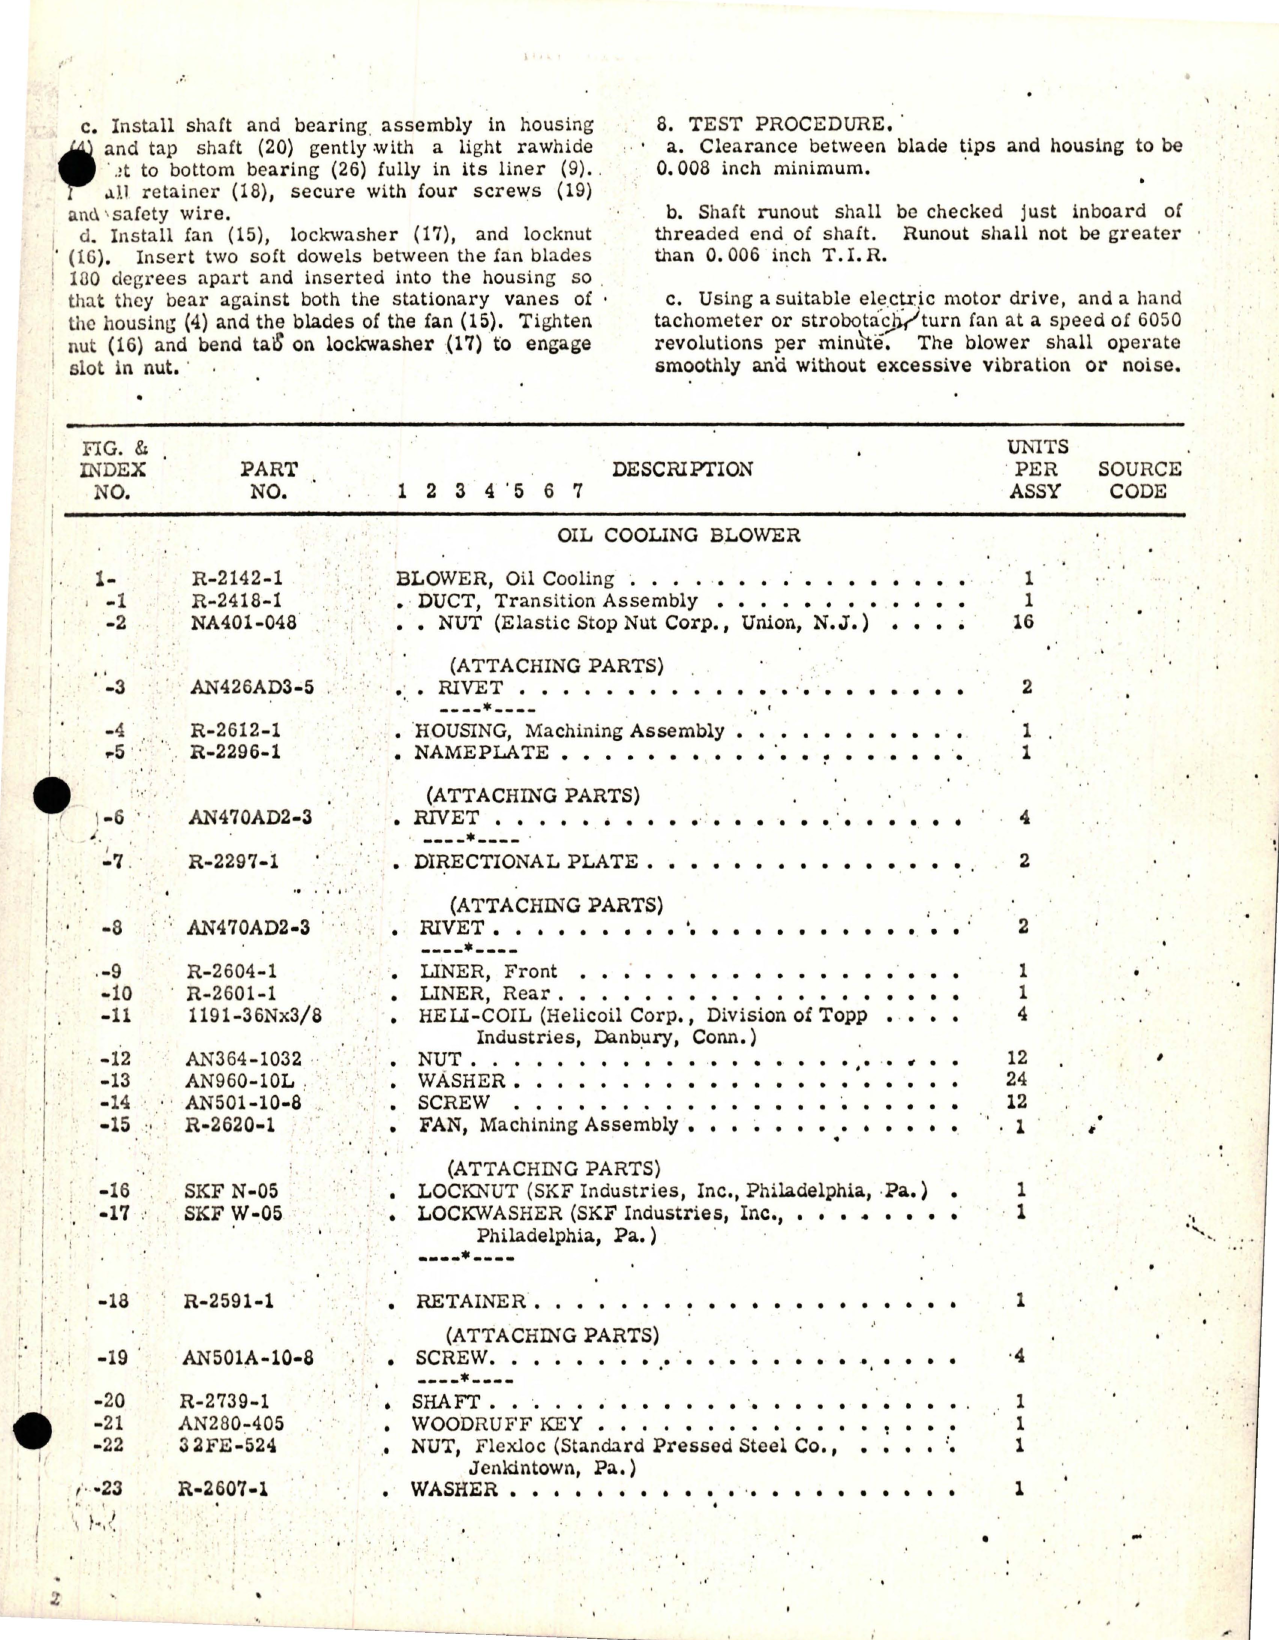 Sample page 5 from AirCorps Library document: Overhaul with Parts Breakdown for Oil Cooling Blower Assembly - A15008